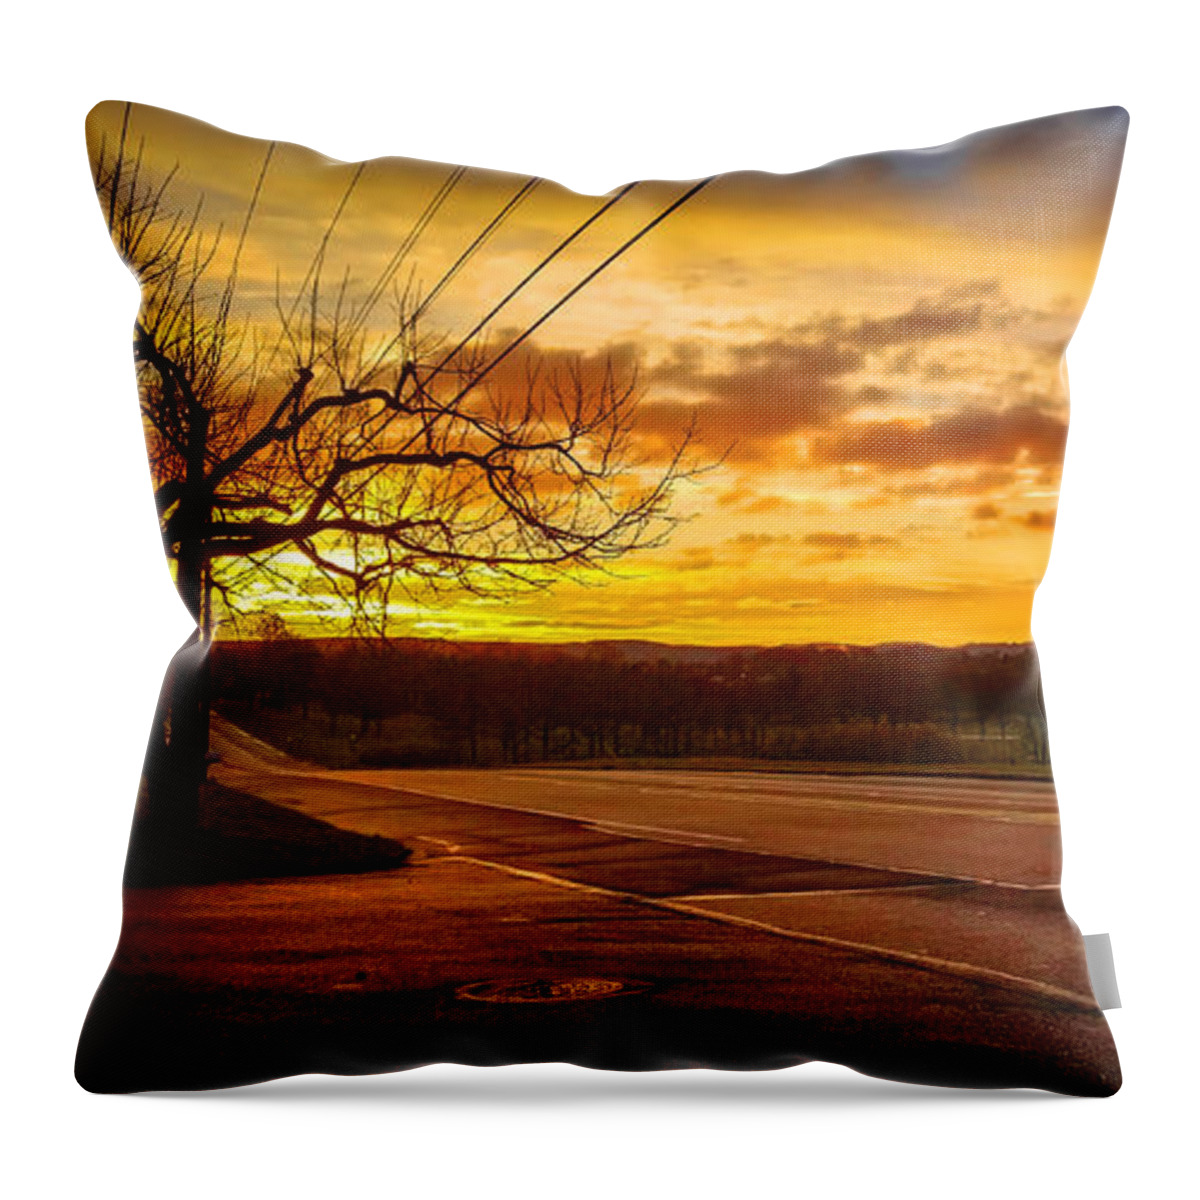 Sunrise Throw Pillow featuring the photograph Broadway Sunrise by Jason Fink